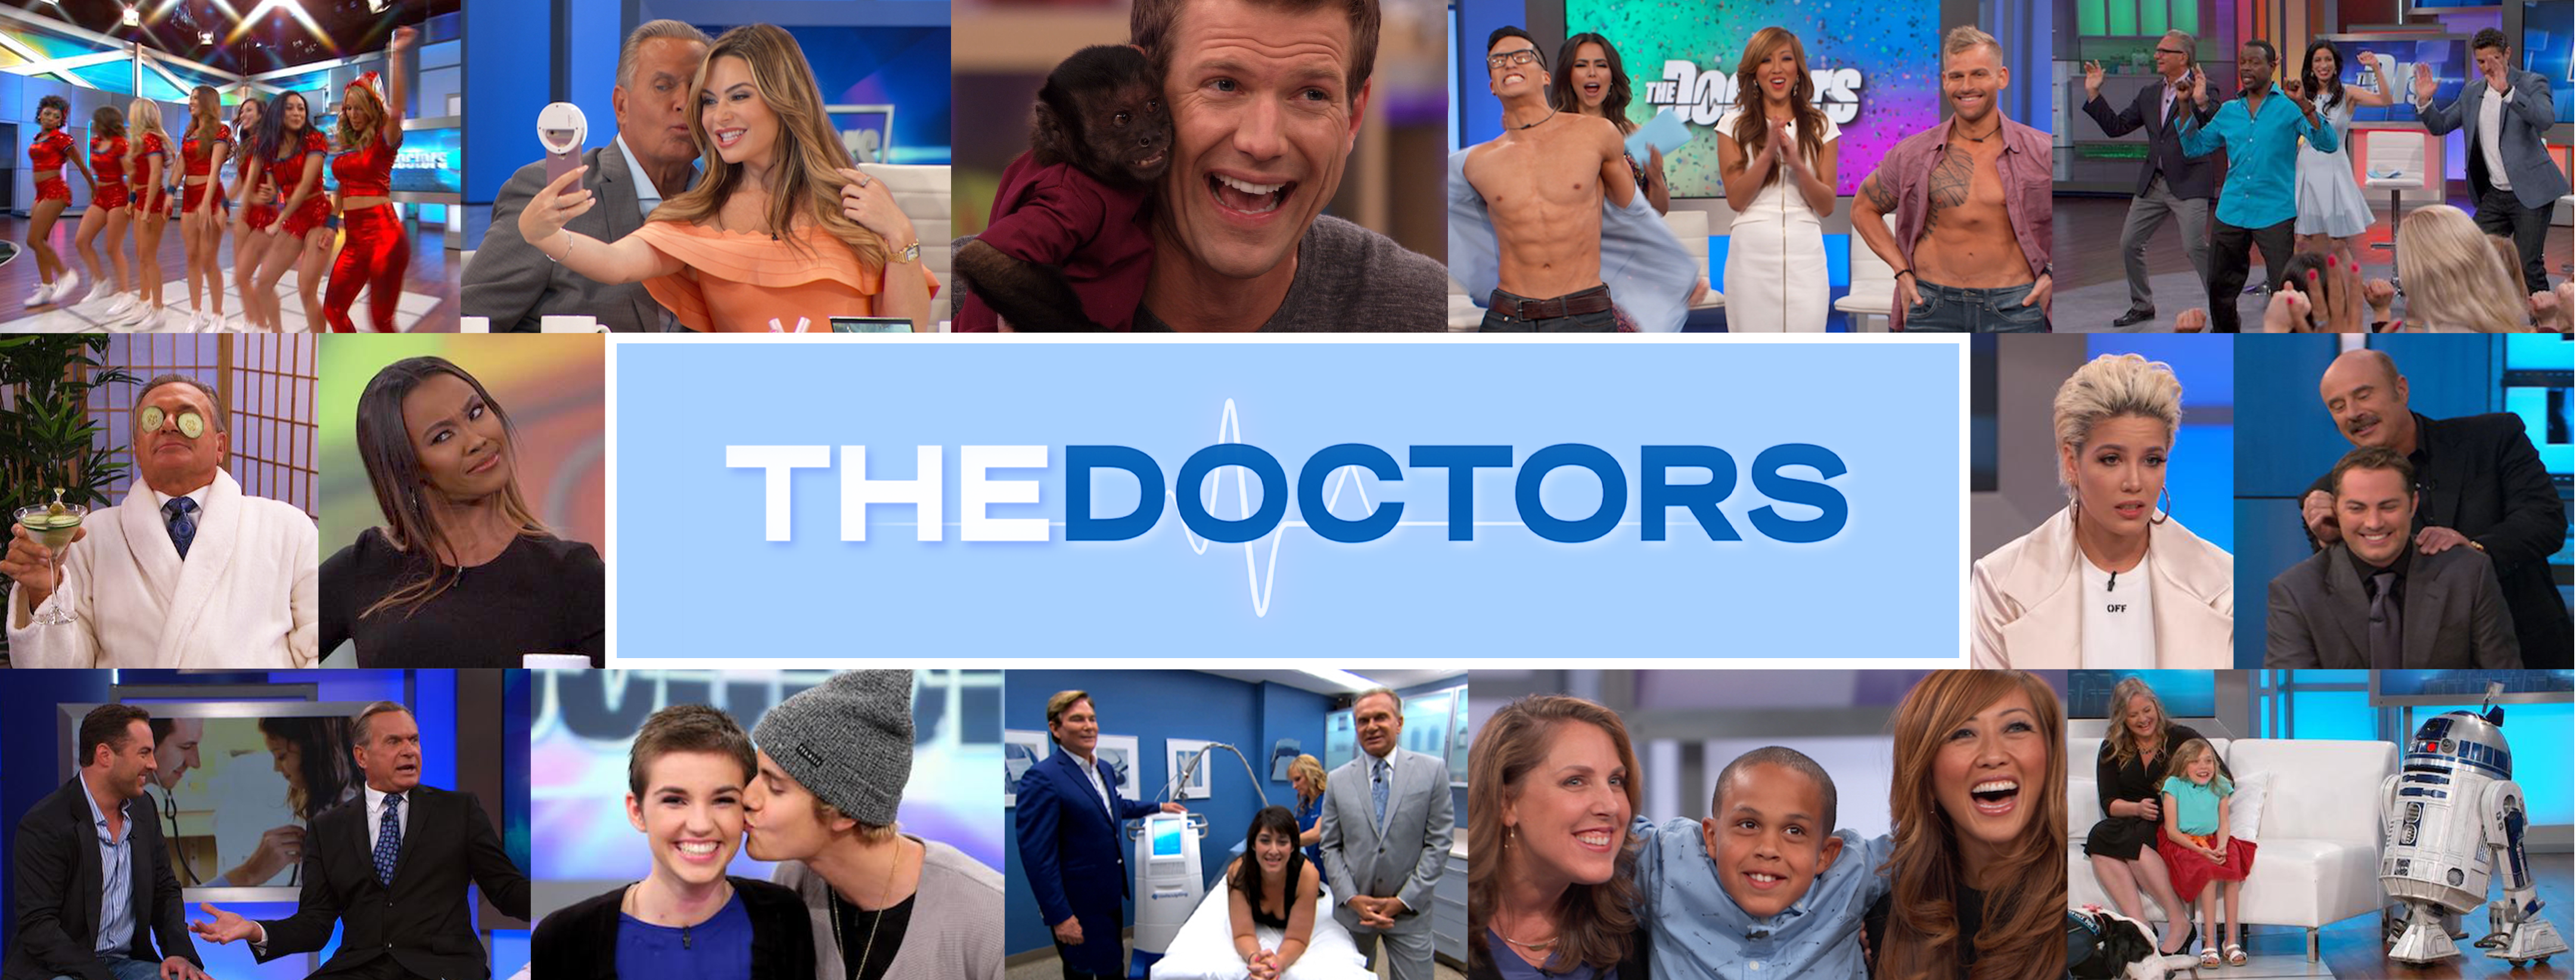 Enter for Your Chance to Win a Baloo Weighted Blanket | The Doctors TV Show